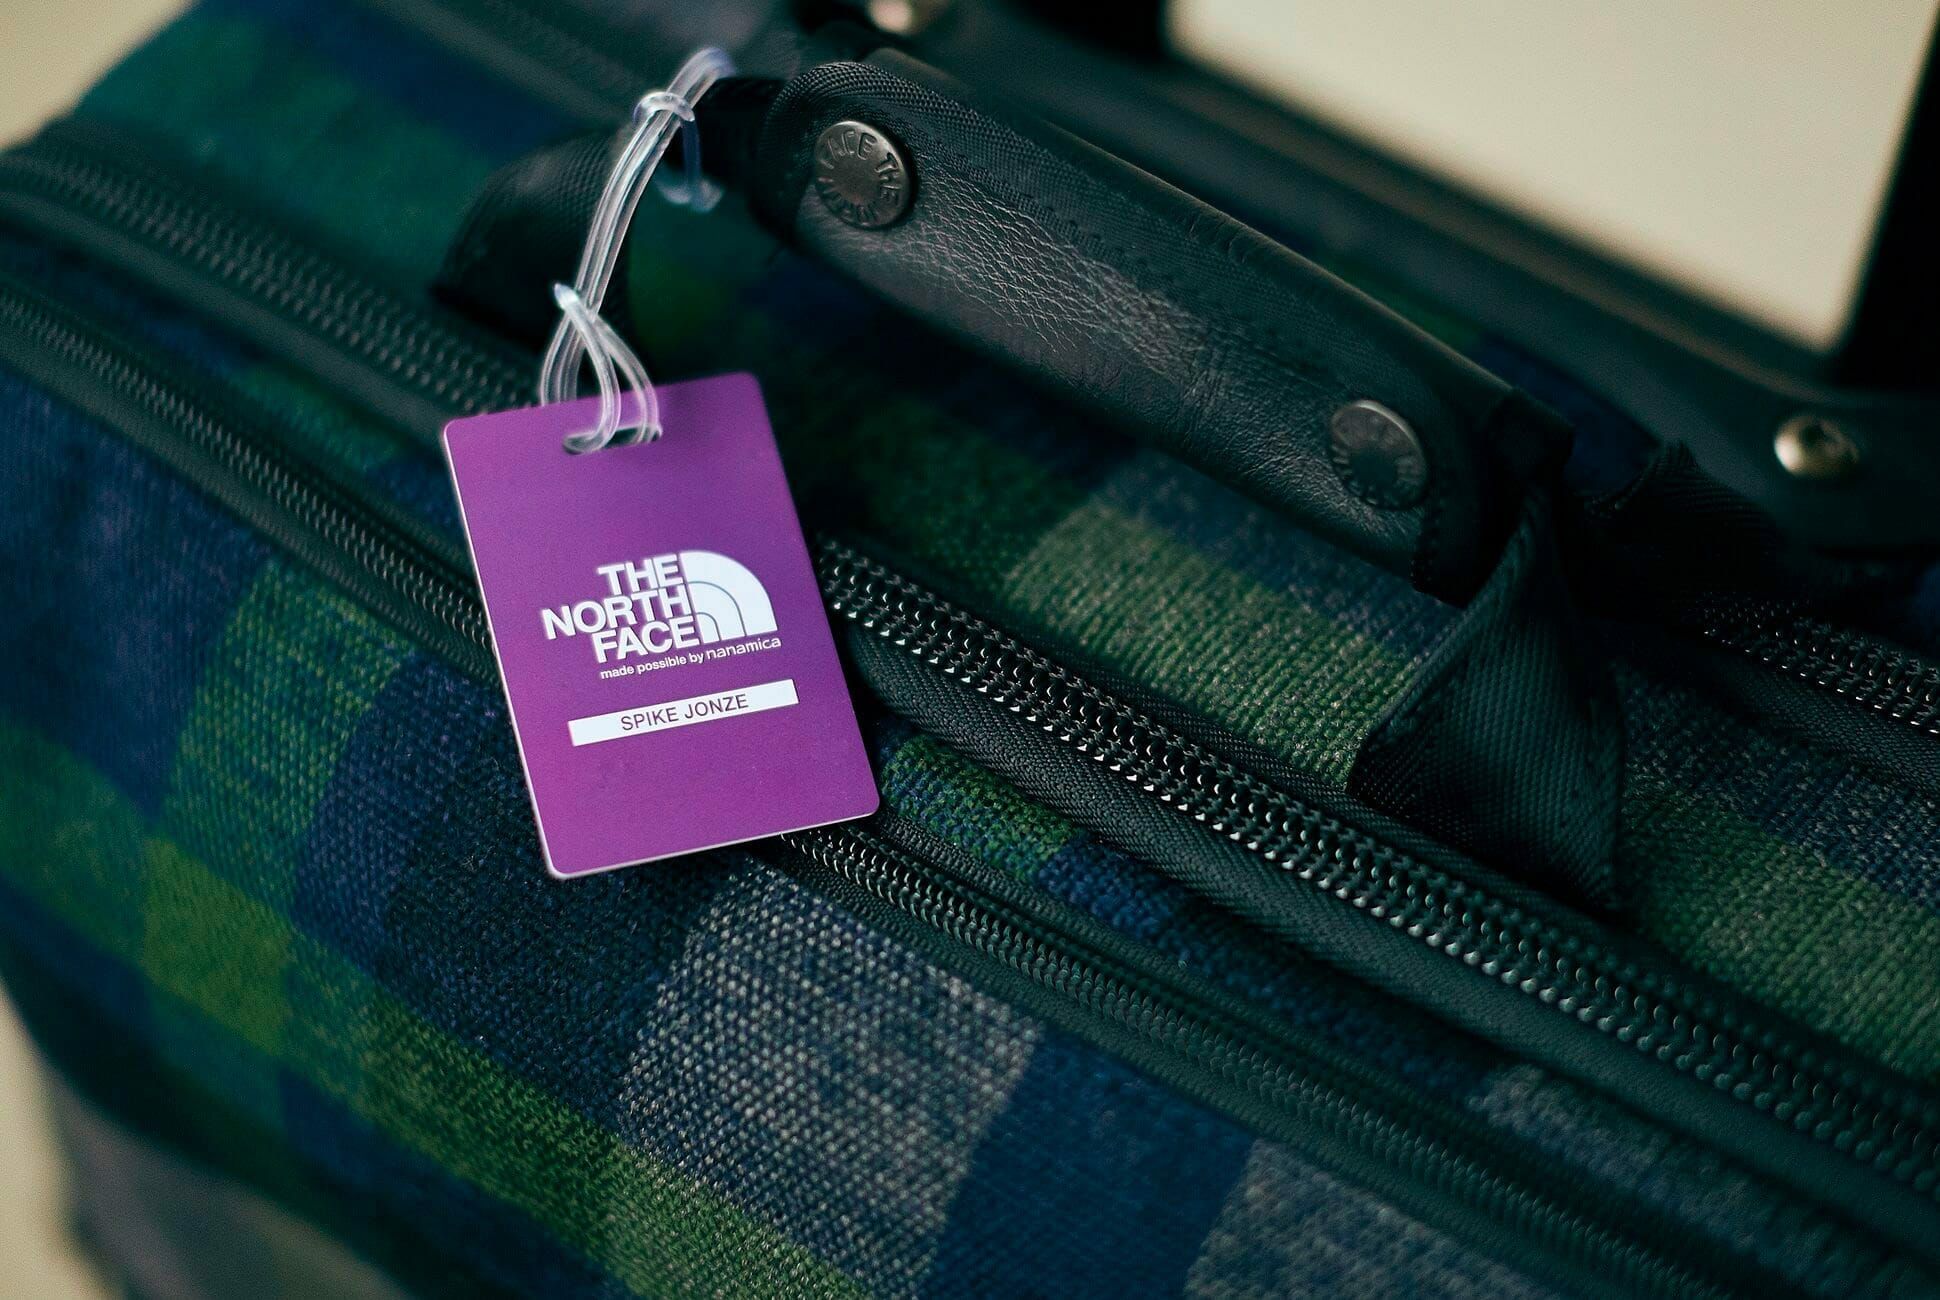 The North Face Purple Label and Spike Jonze Just Released Some